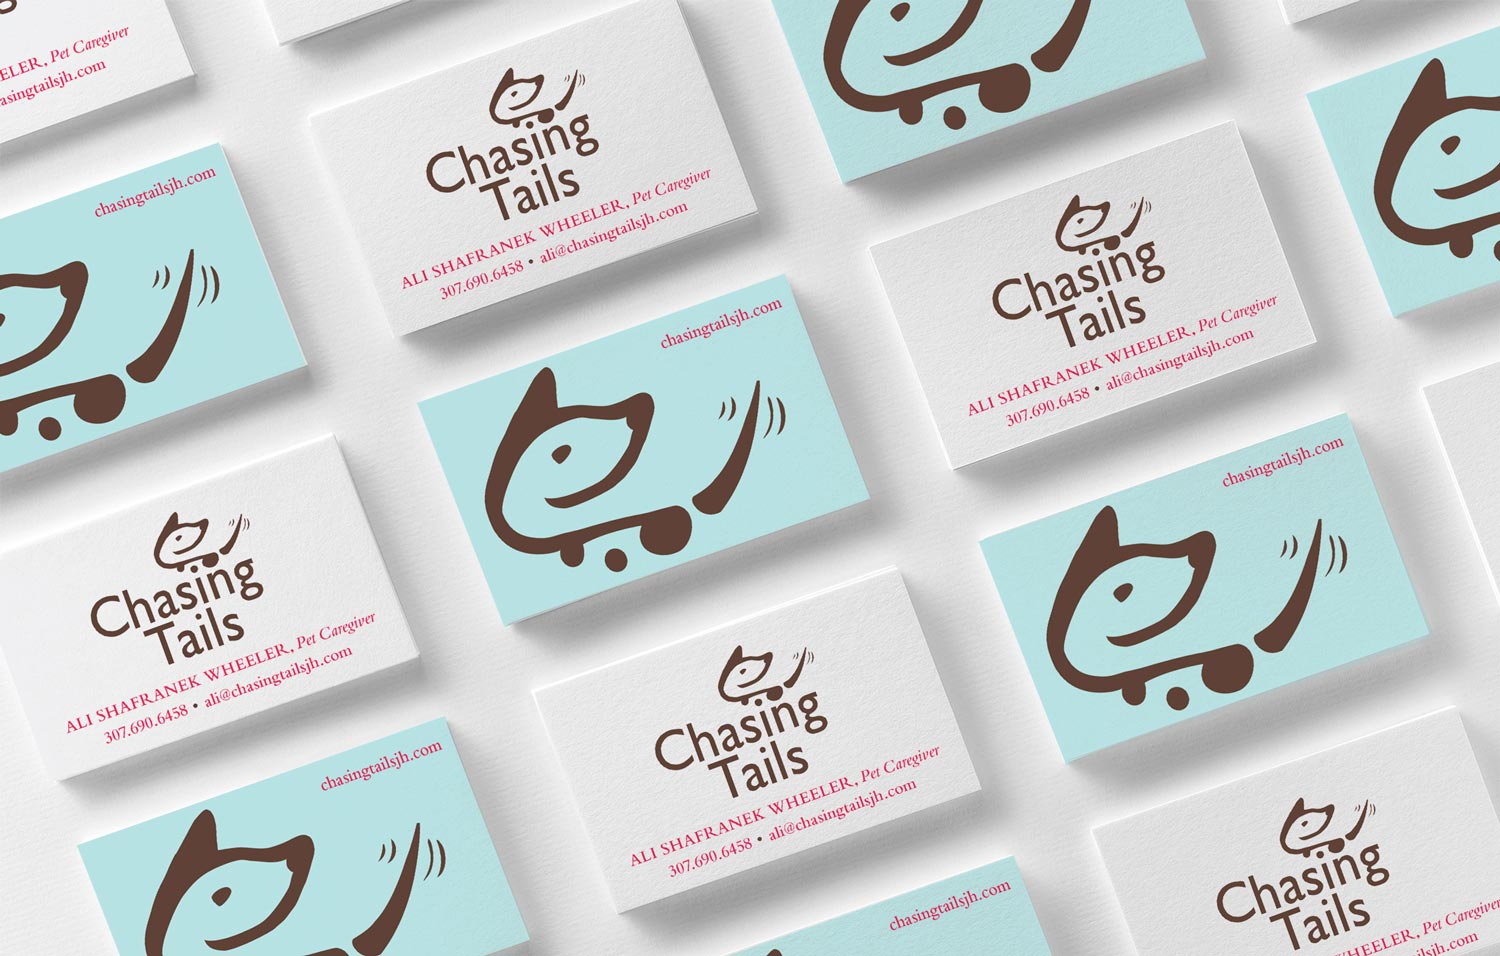 Chasing Tails Branding and Graphic Design Projects